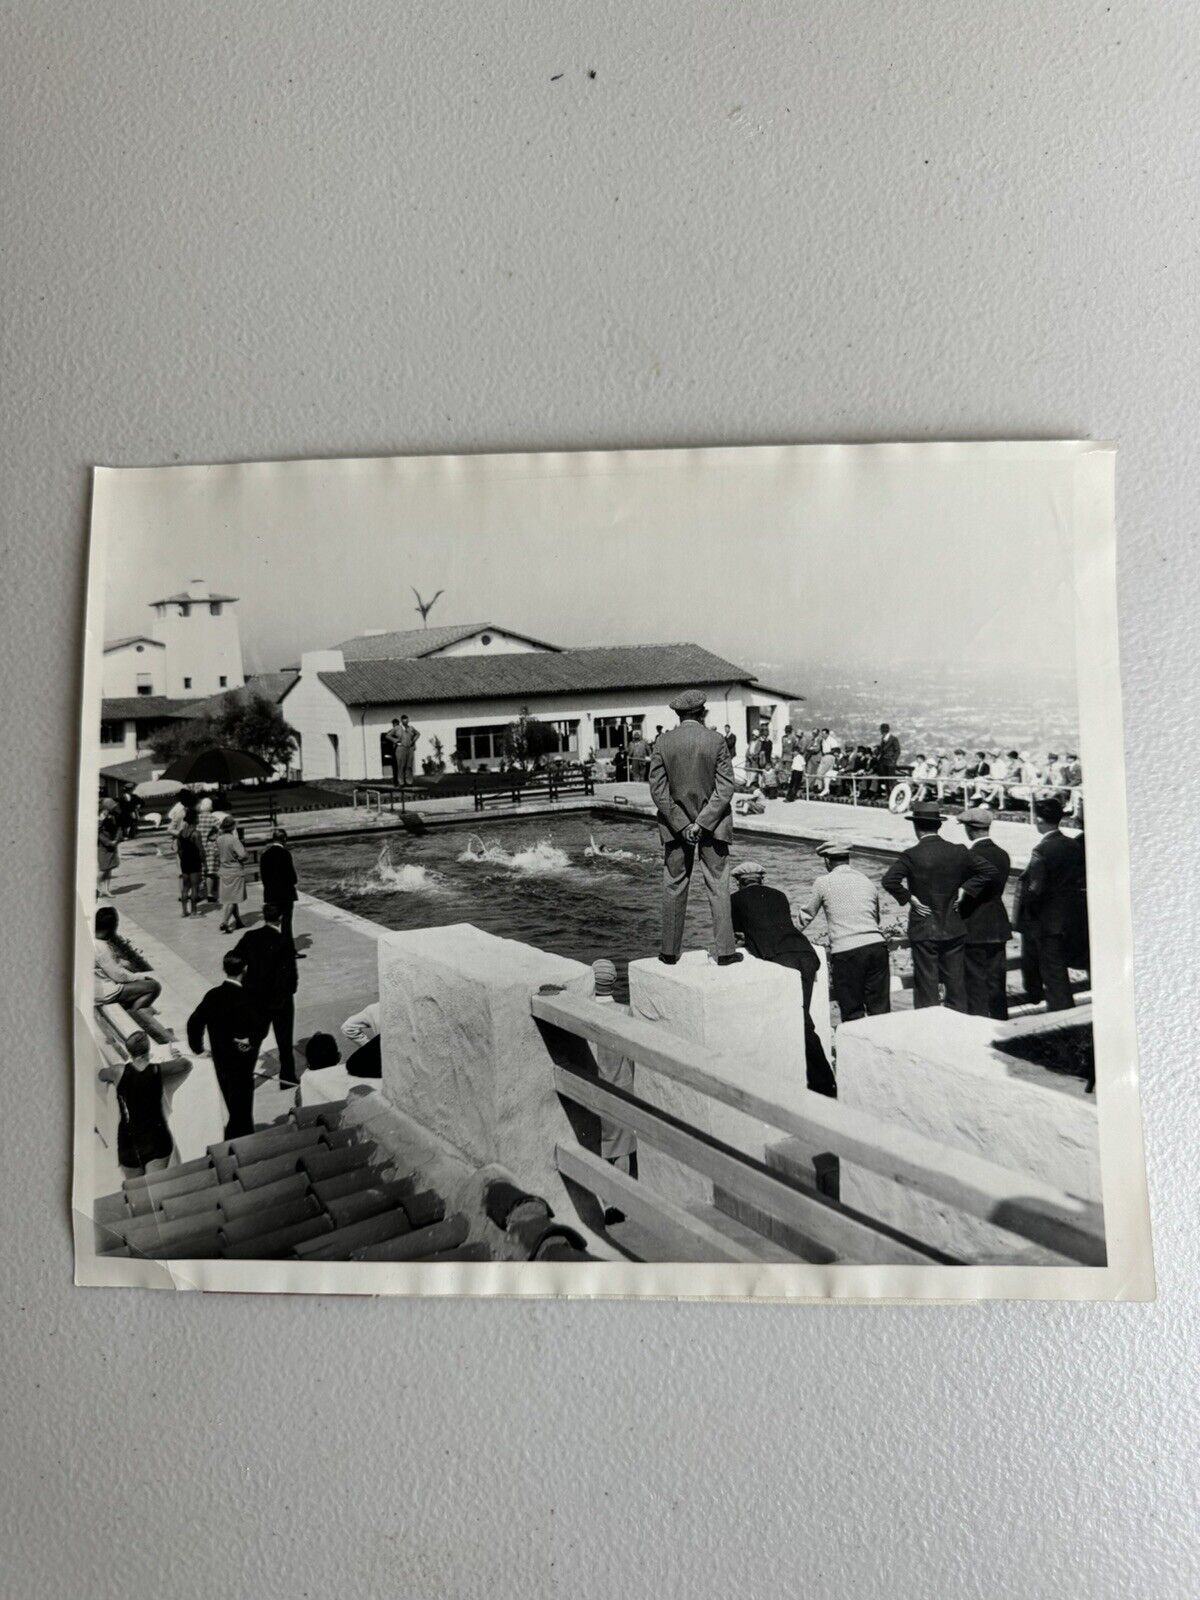 Vintage 1950’s Press Photo By Underwood SWIMMING ON TOPOF A MOUNTAIN